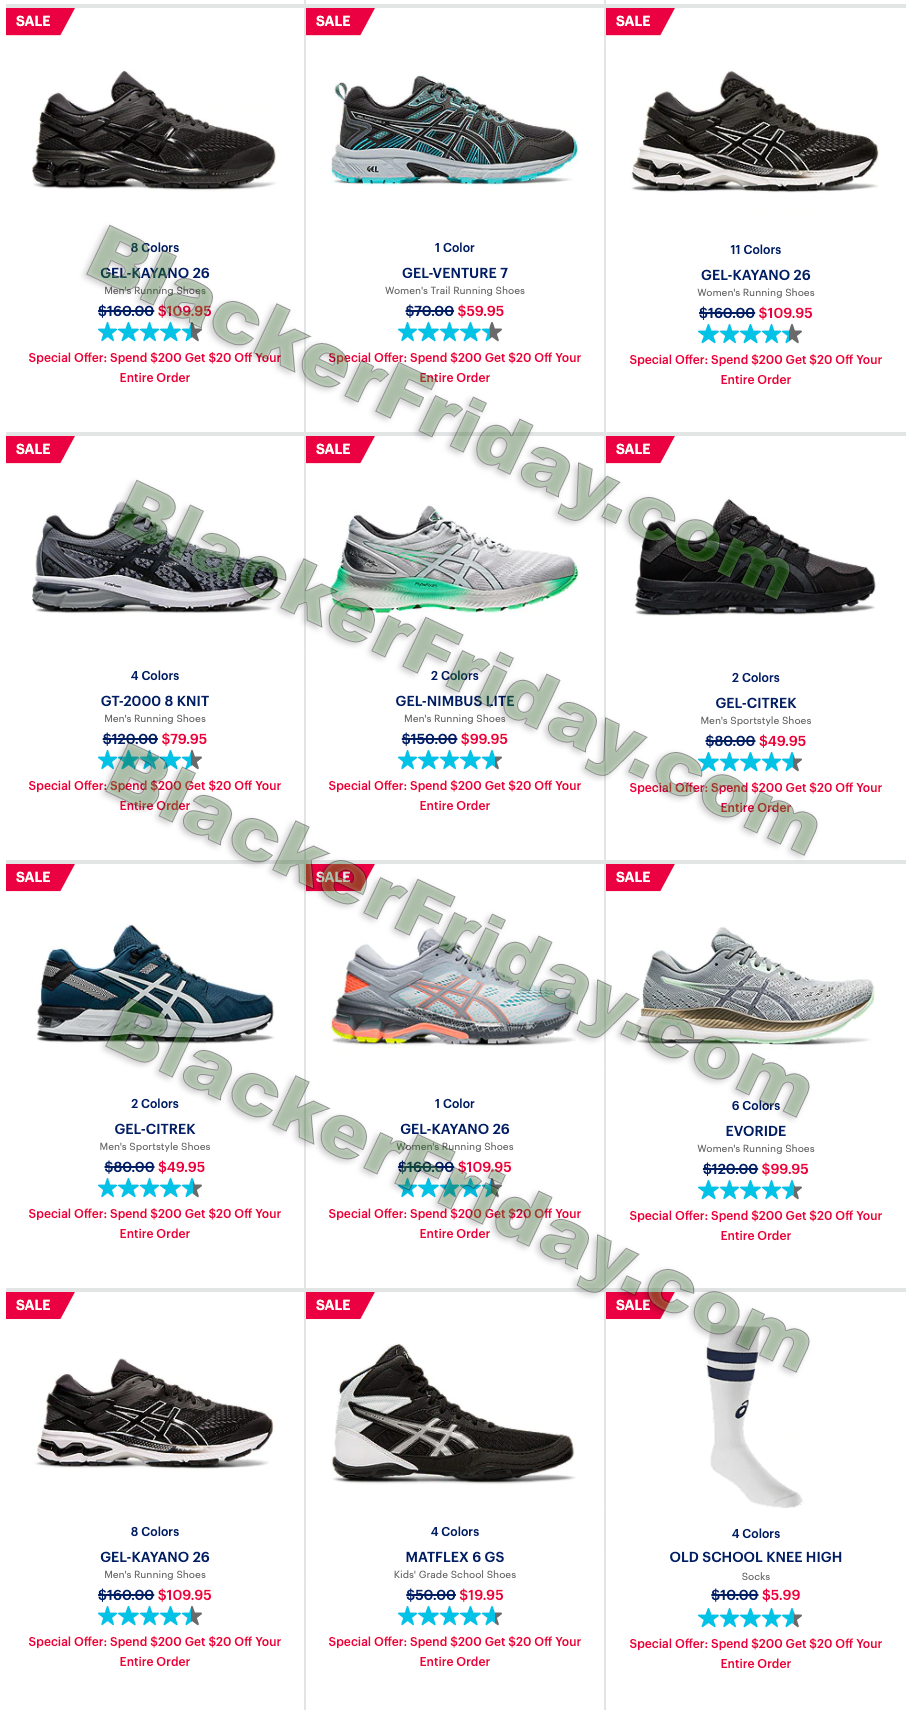 ASICS' After Christmas 2023 Sale - Blacker Friday